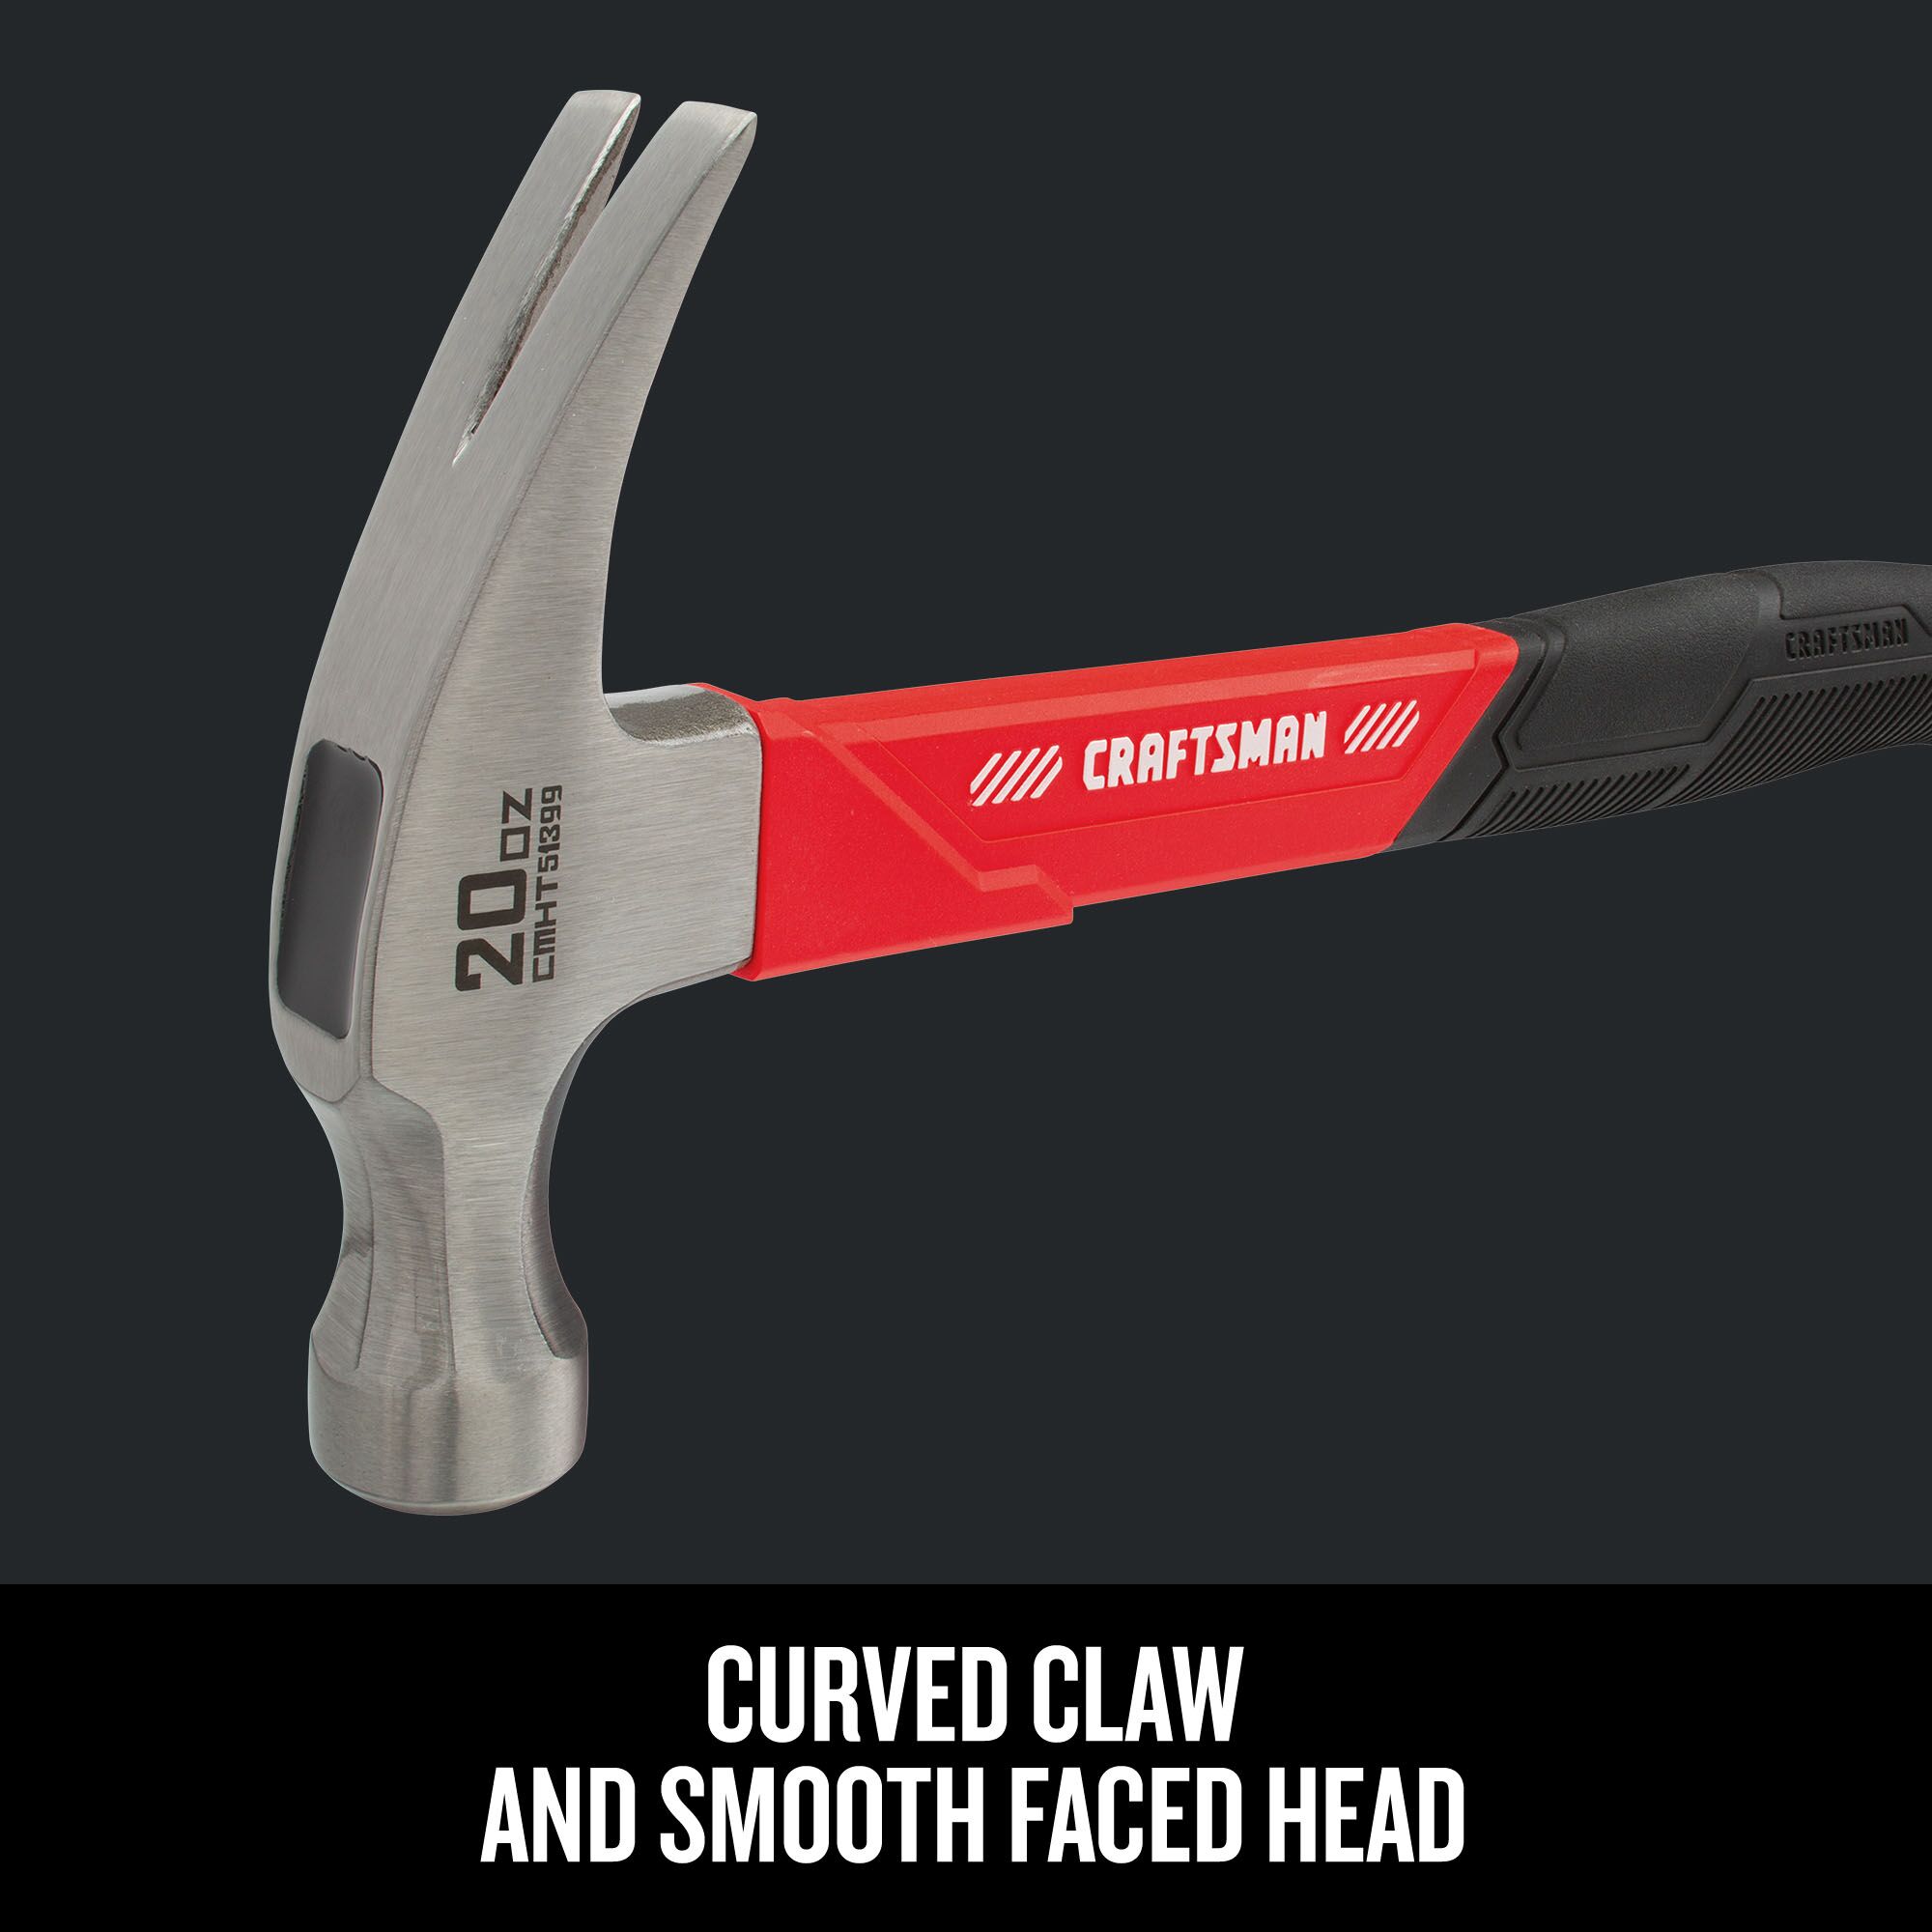 Graphic of CRAFTSMAN Hammers: Dead Blow Hammers: Fiber Grip highlighting product features